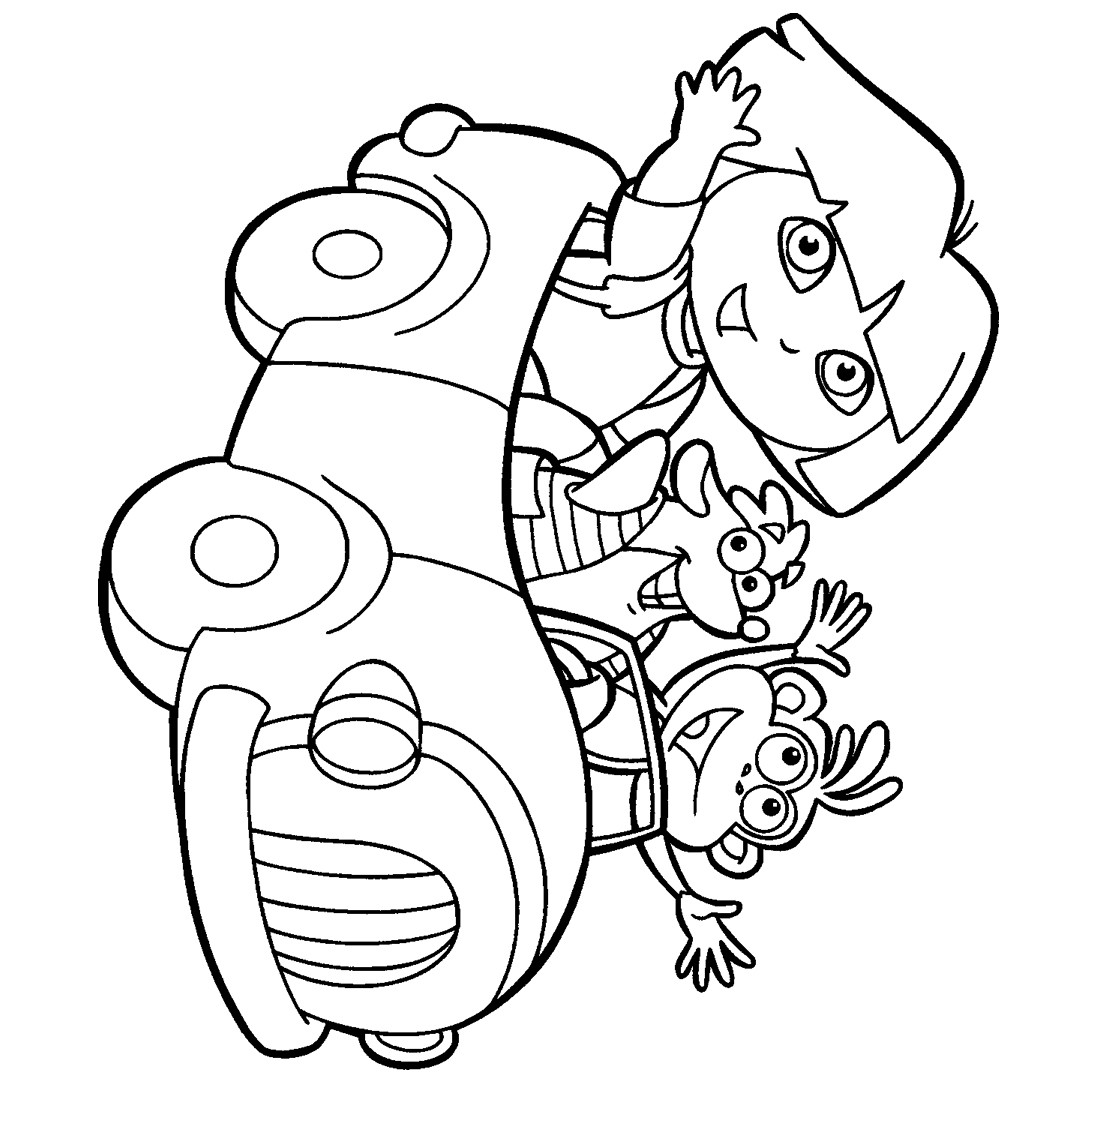 Coloring Pages For Toddlers
 Printable coloring pages for kids